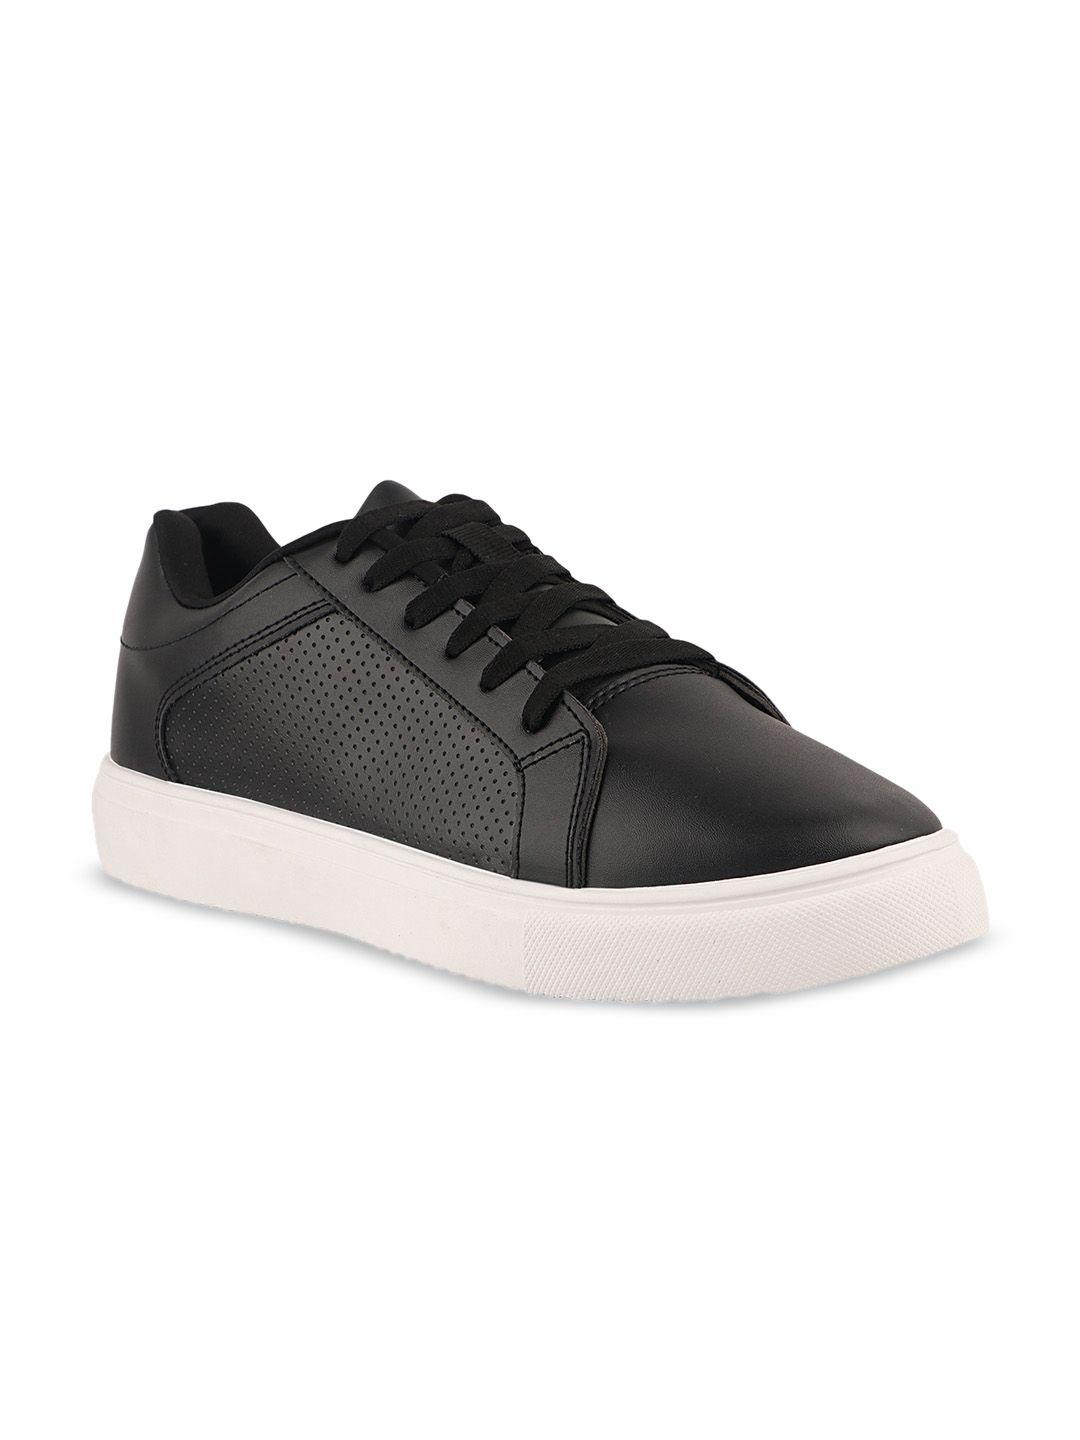 the roadster lifestyle co. men round toe lace up sneakers